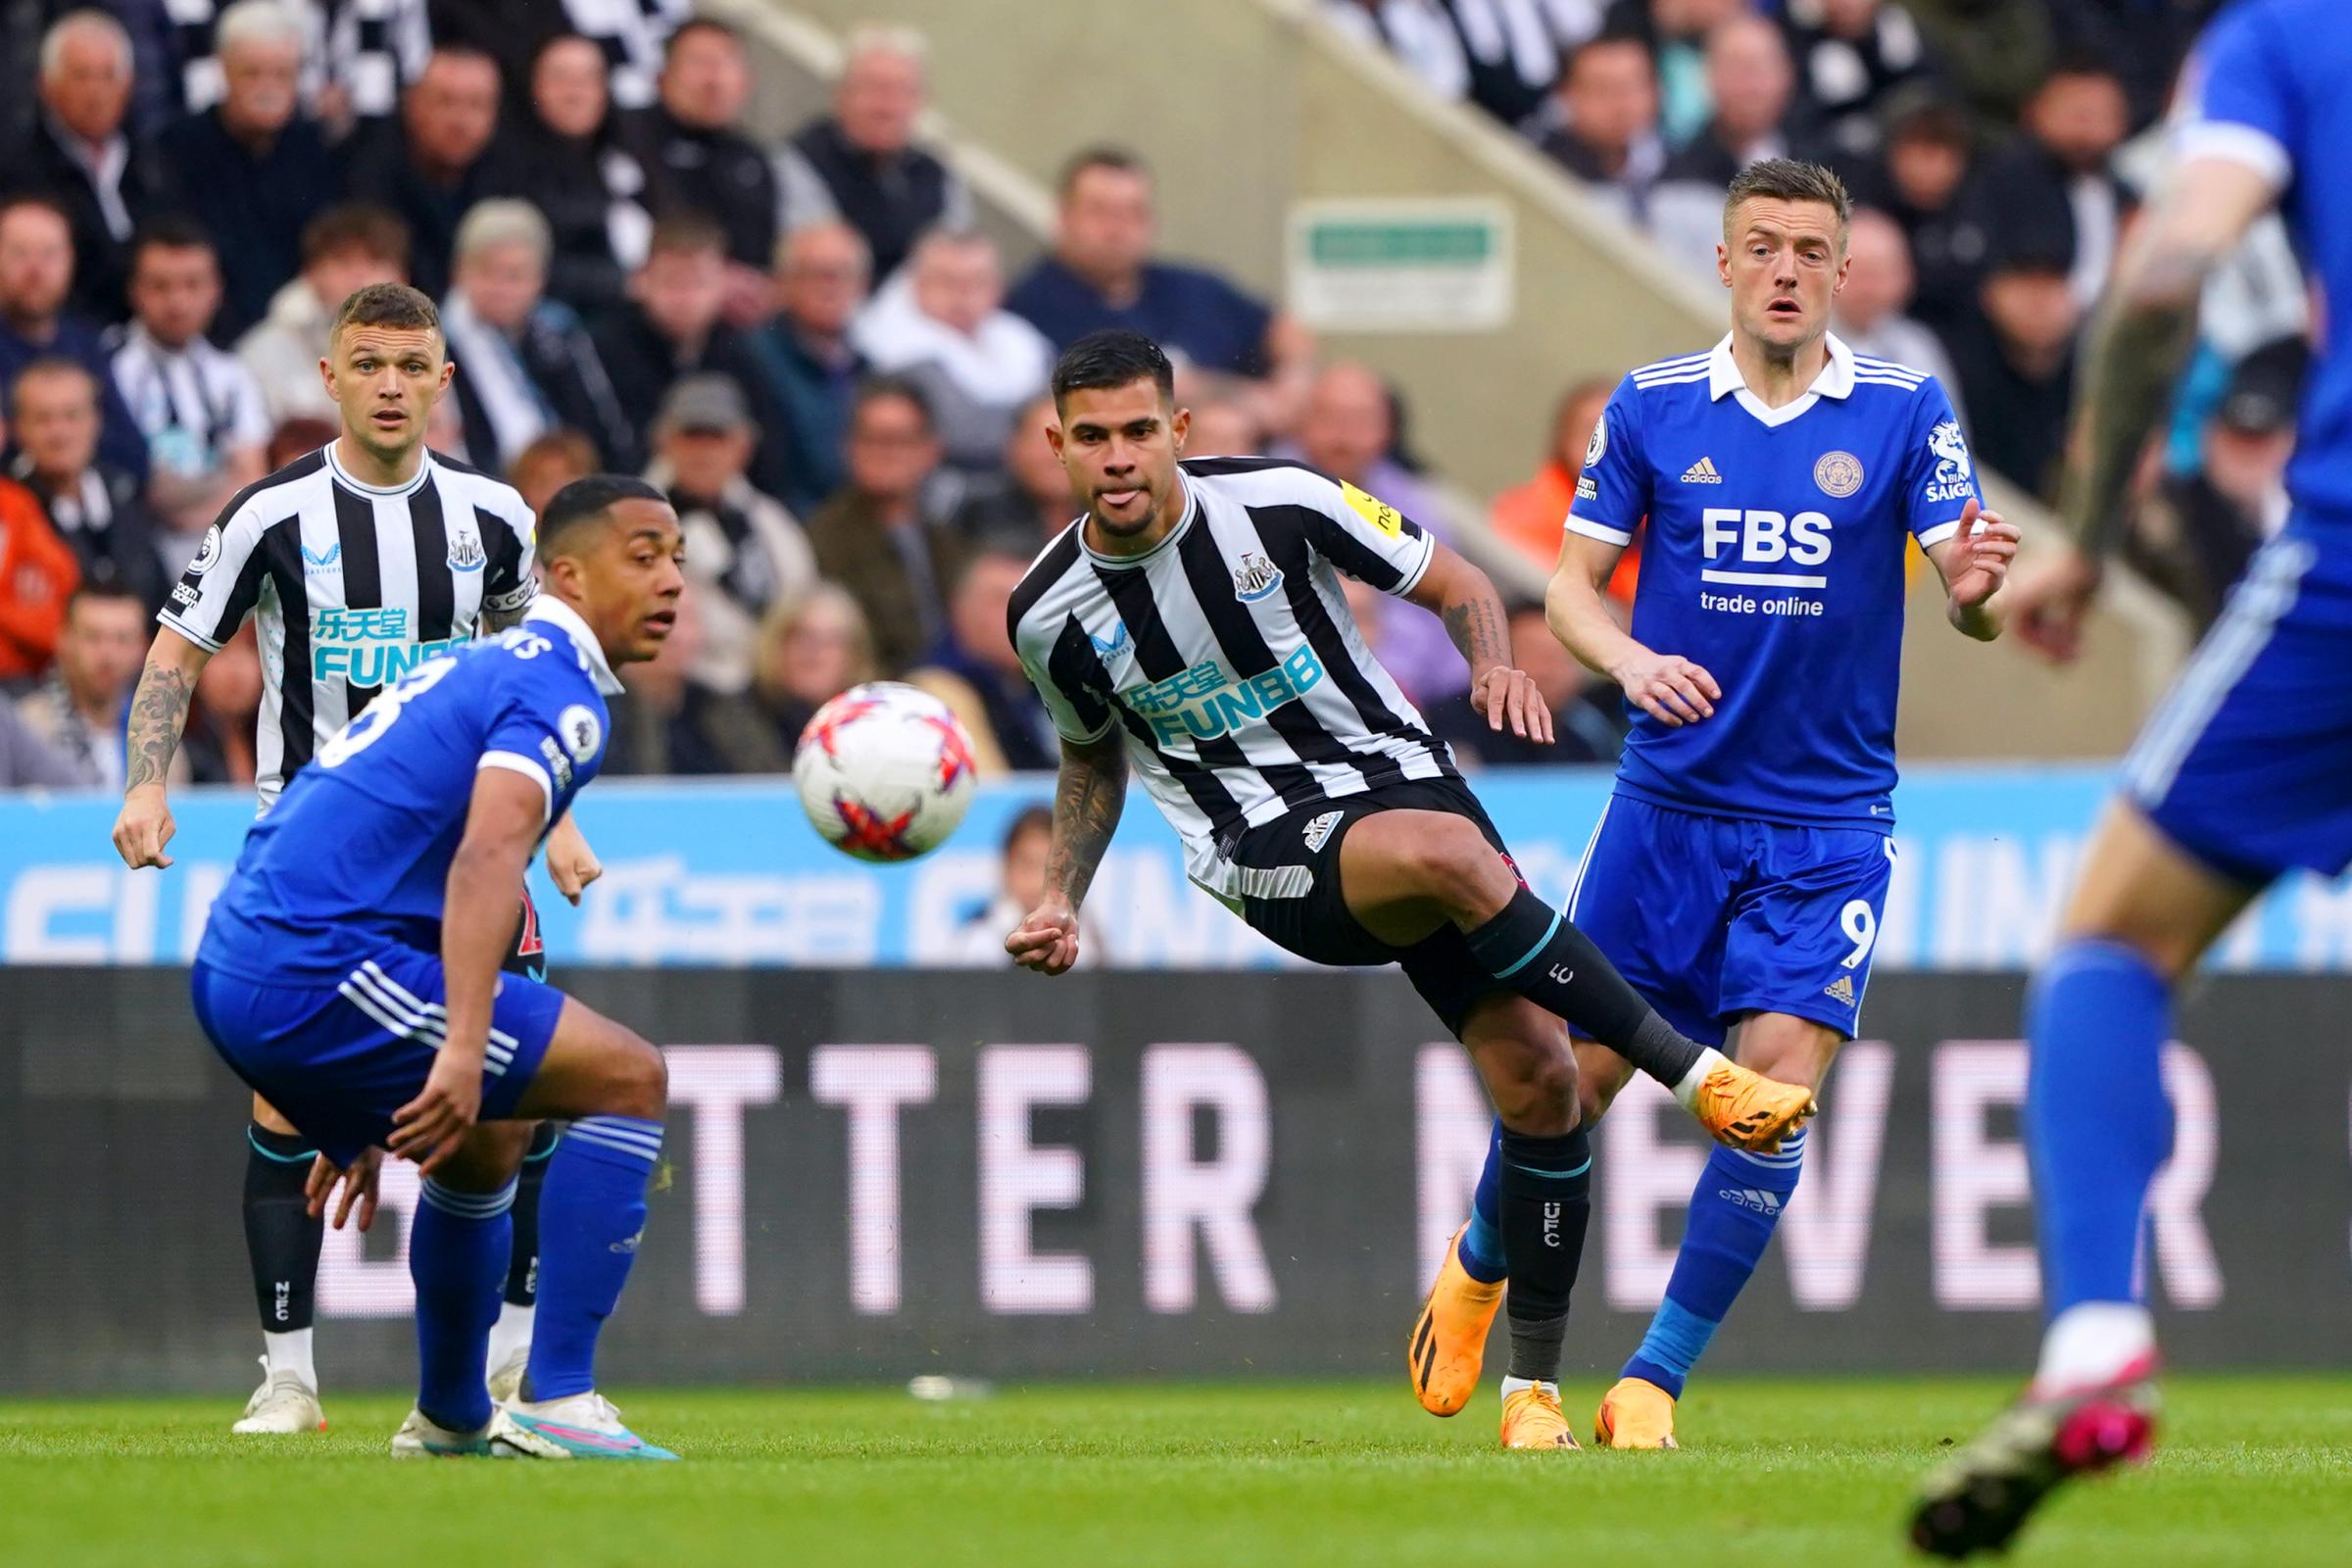 Newcastle United 0 Leicester City 0